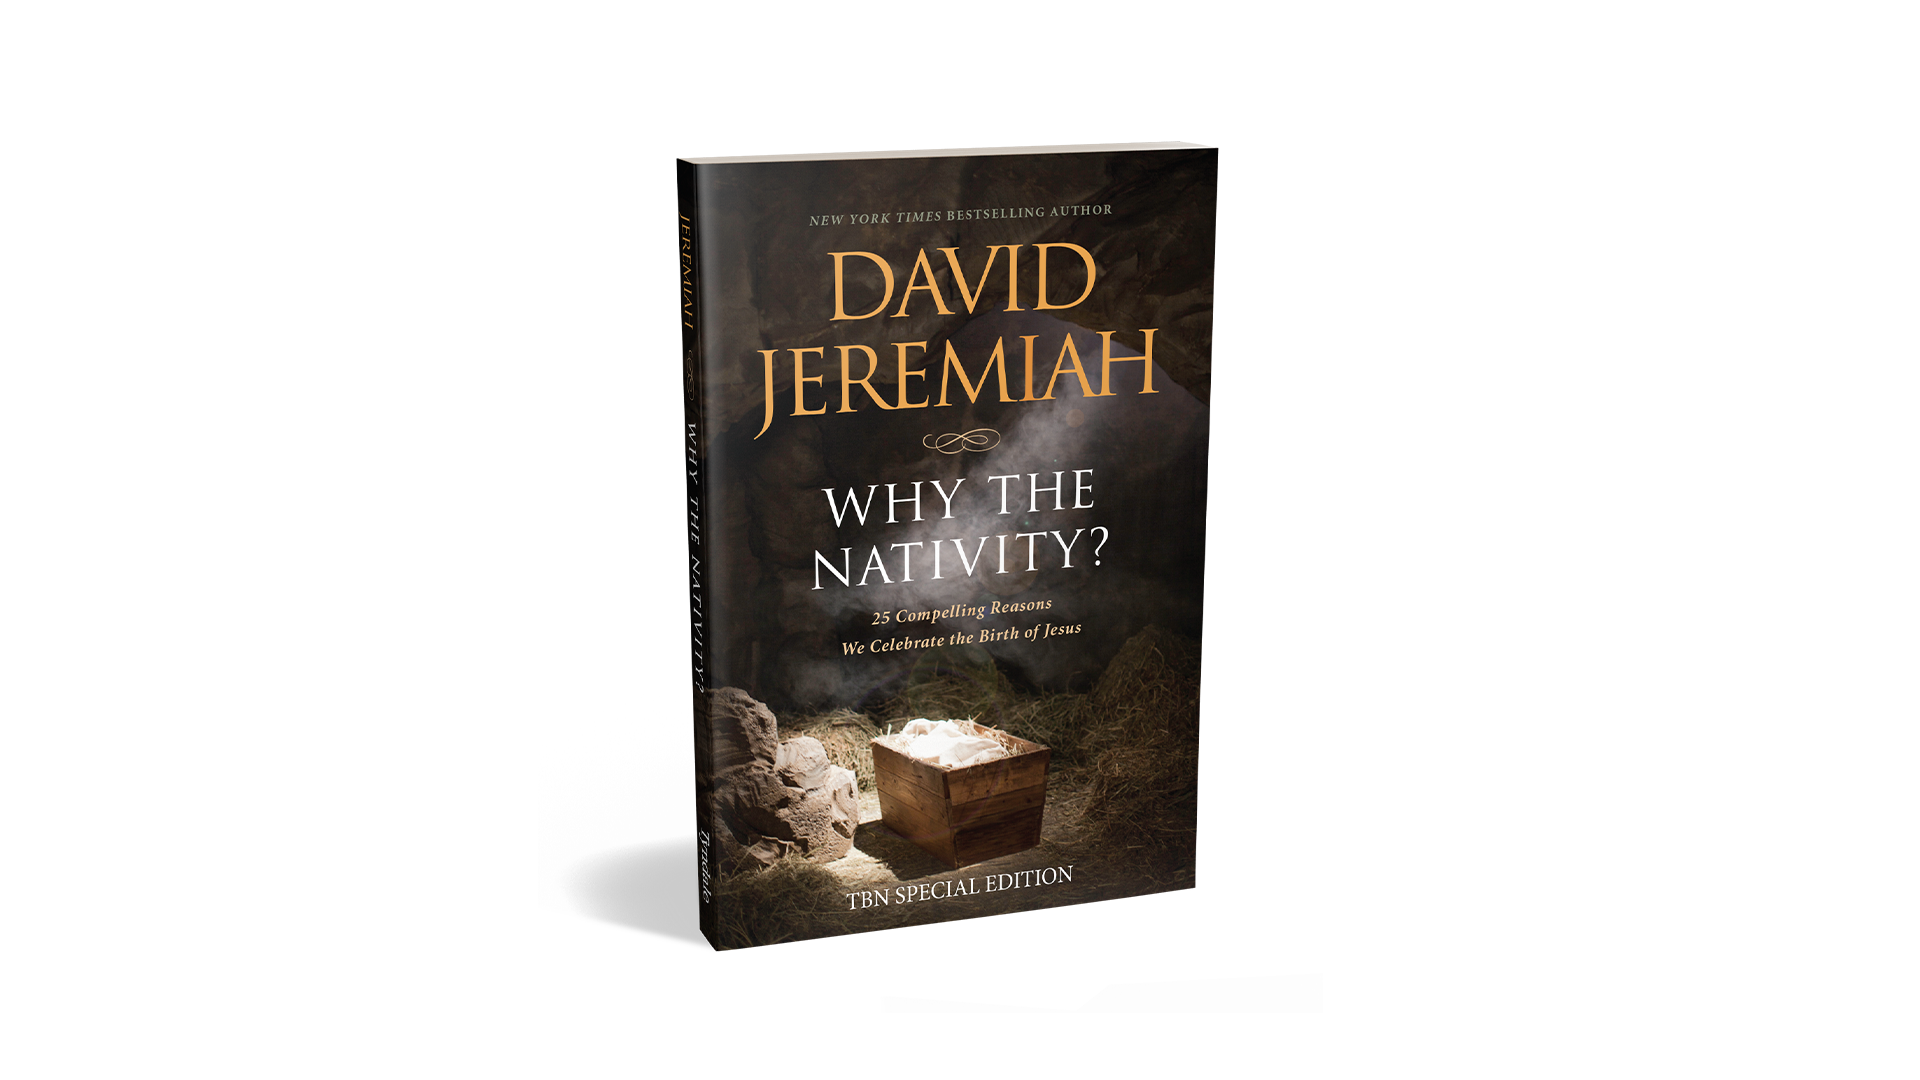 Receive Why the Nativity by David Jeremiah on TBN